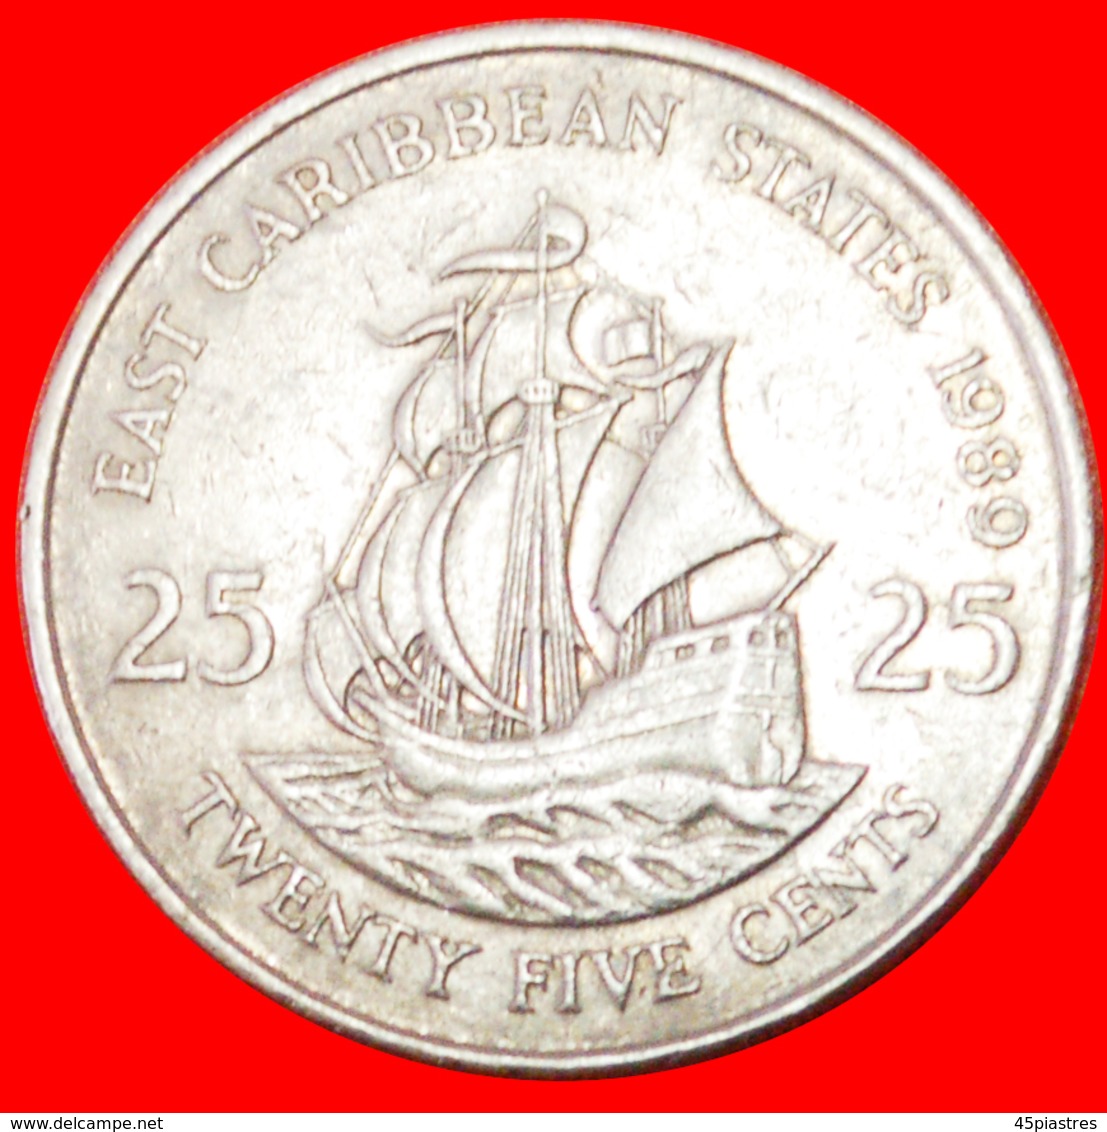 # SHIP Of Sir Francis Drake (1542-1596): EAST CARIBBEAN STATES ★ 25 CENTS 1989! LOW START ★ NO RESERVE! - Ostkaribischer Staaten